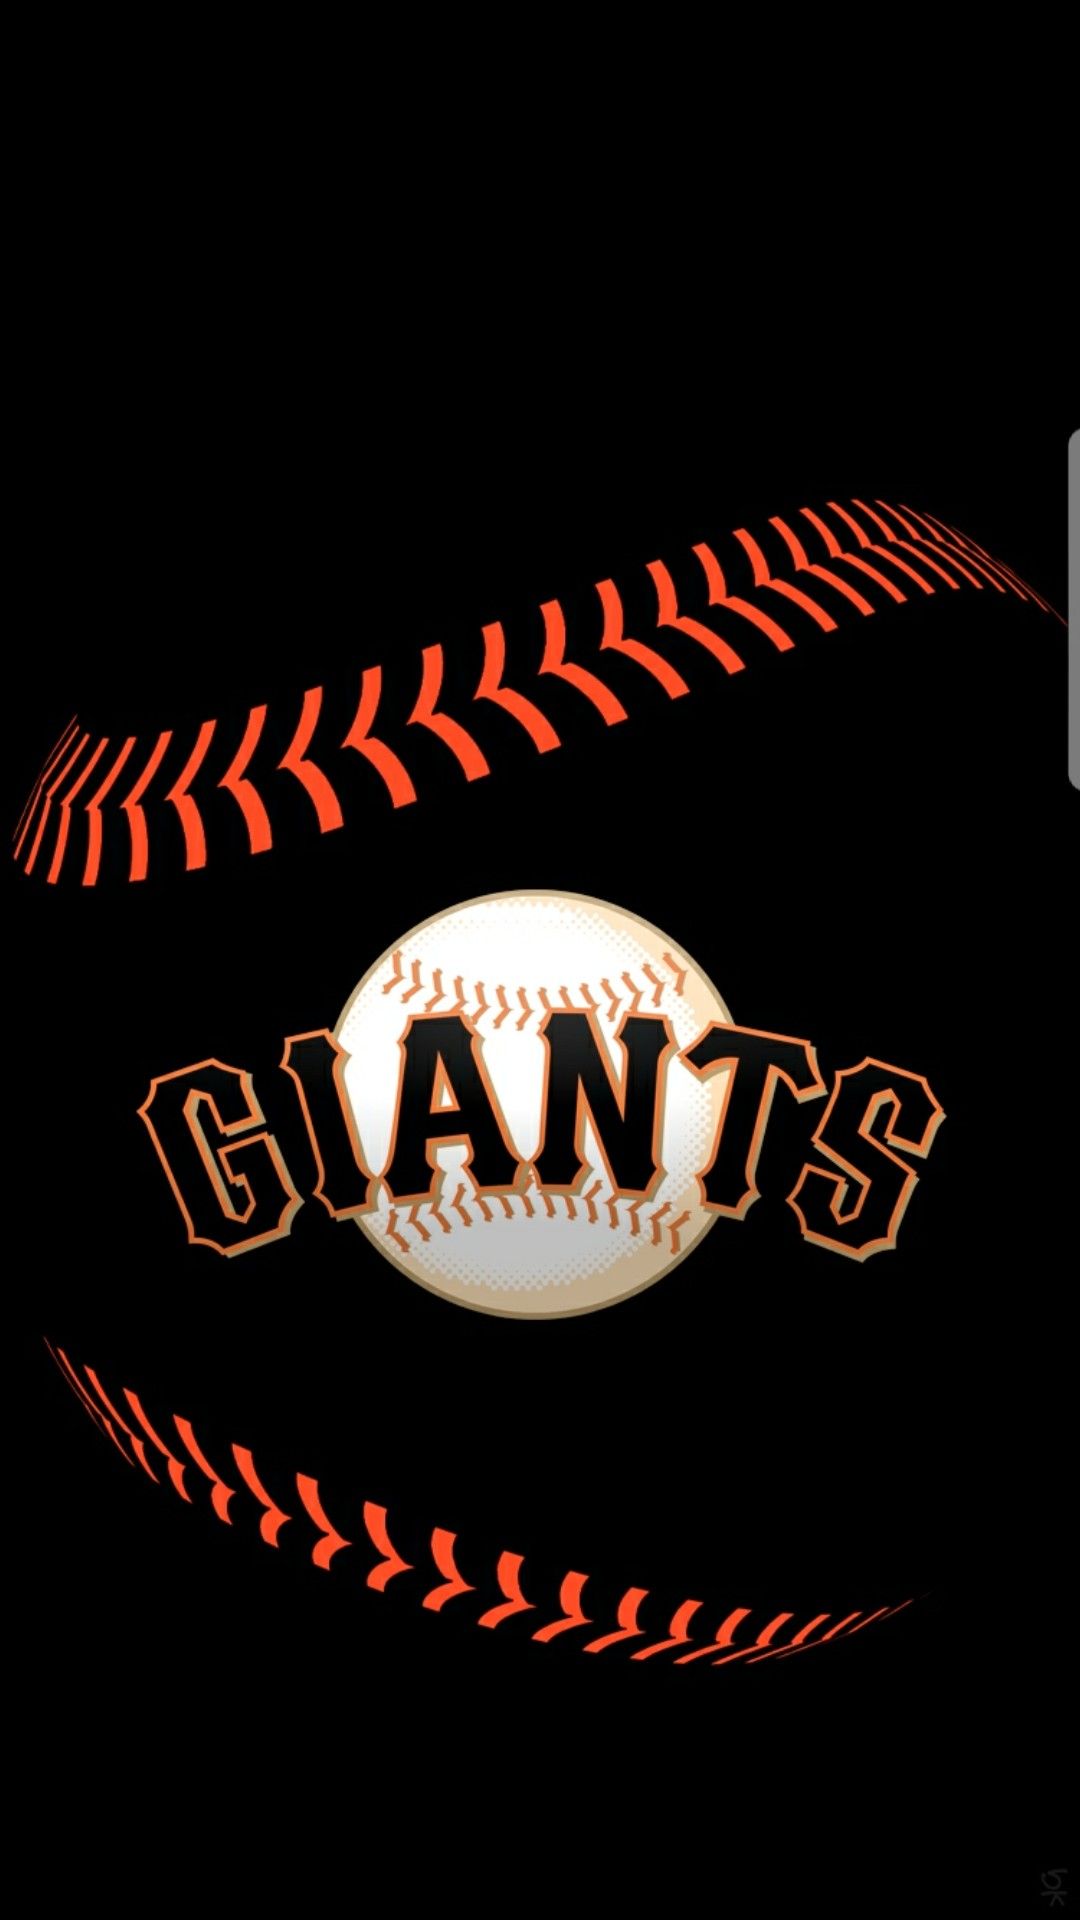 San Francisco Giants Video Conferencing Backgrounds